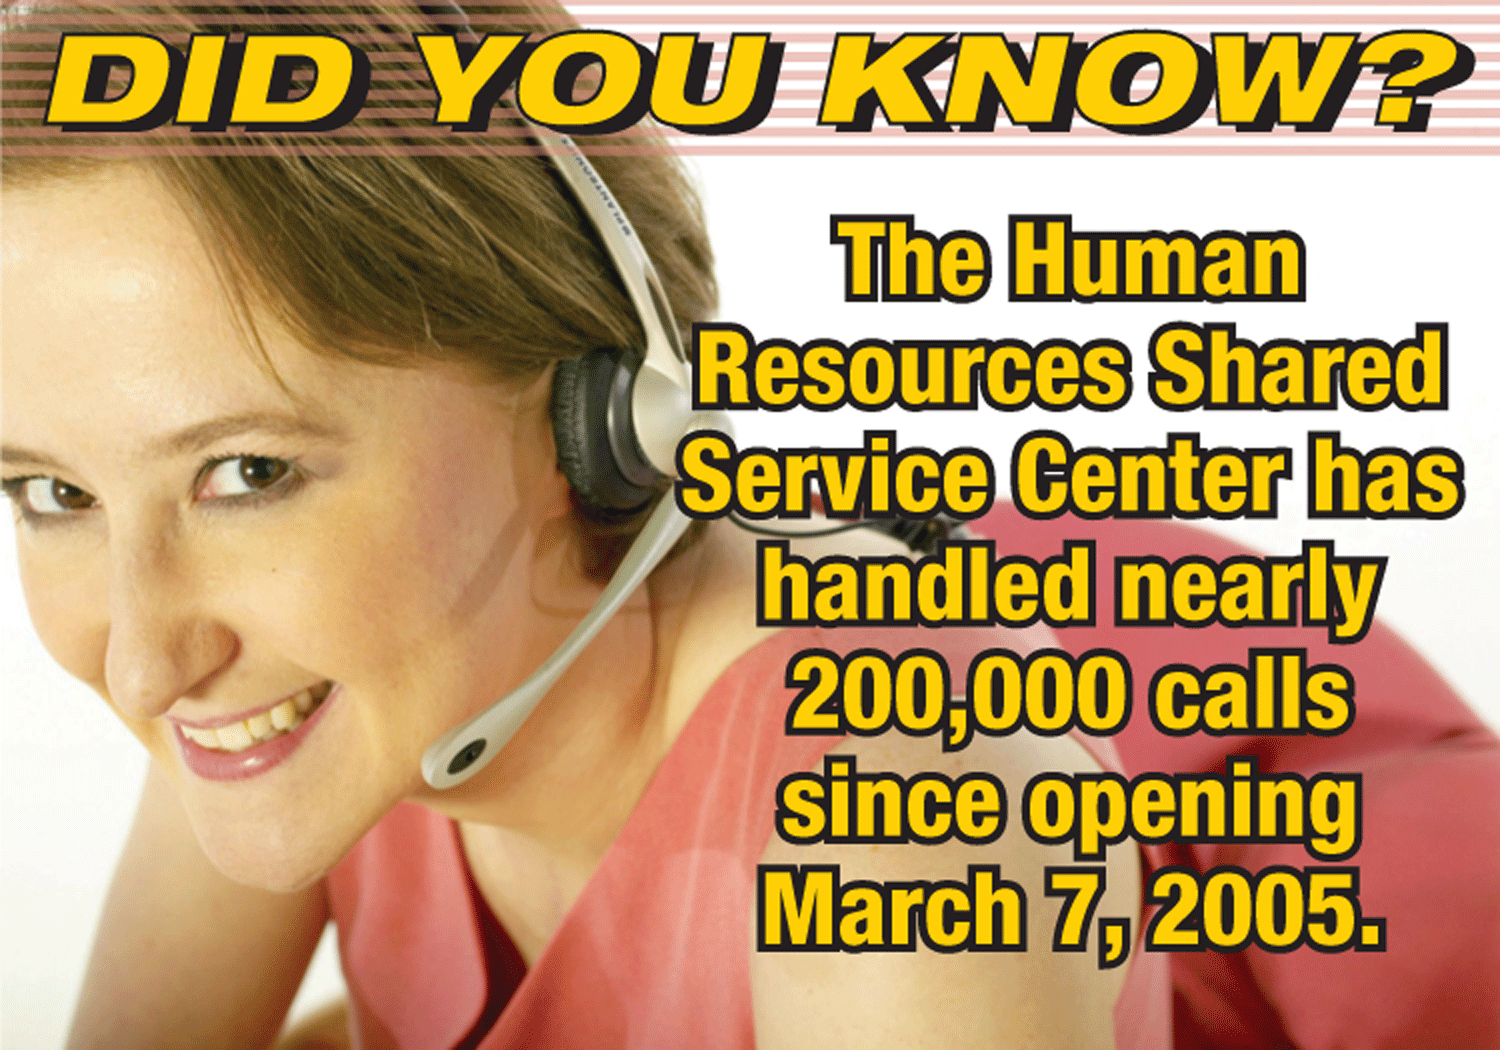 Did you know? The Human Resources Shared Service Center has handled nearly 200,000 calls since opening March 7, 2005.